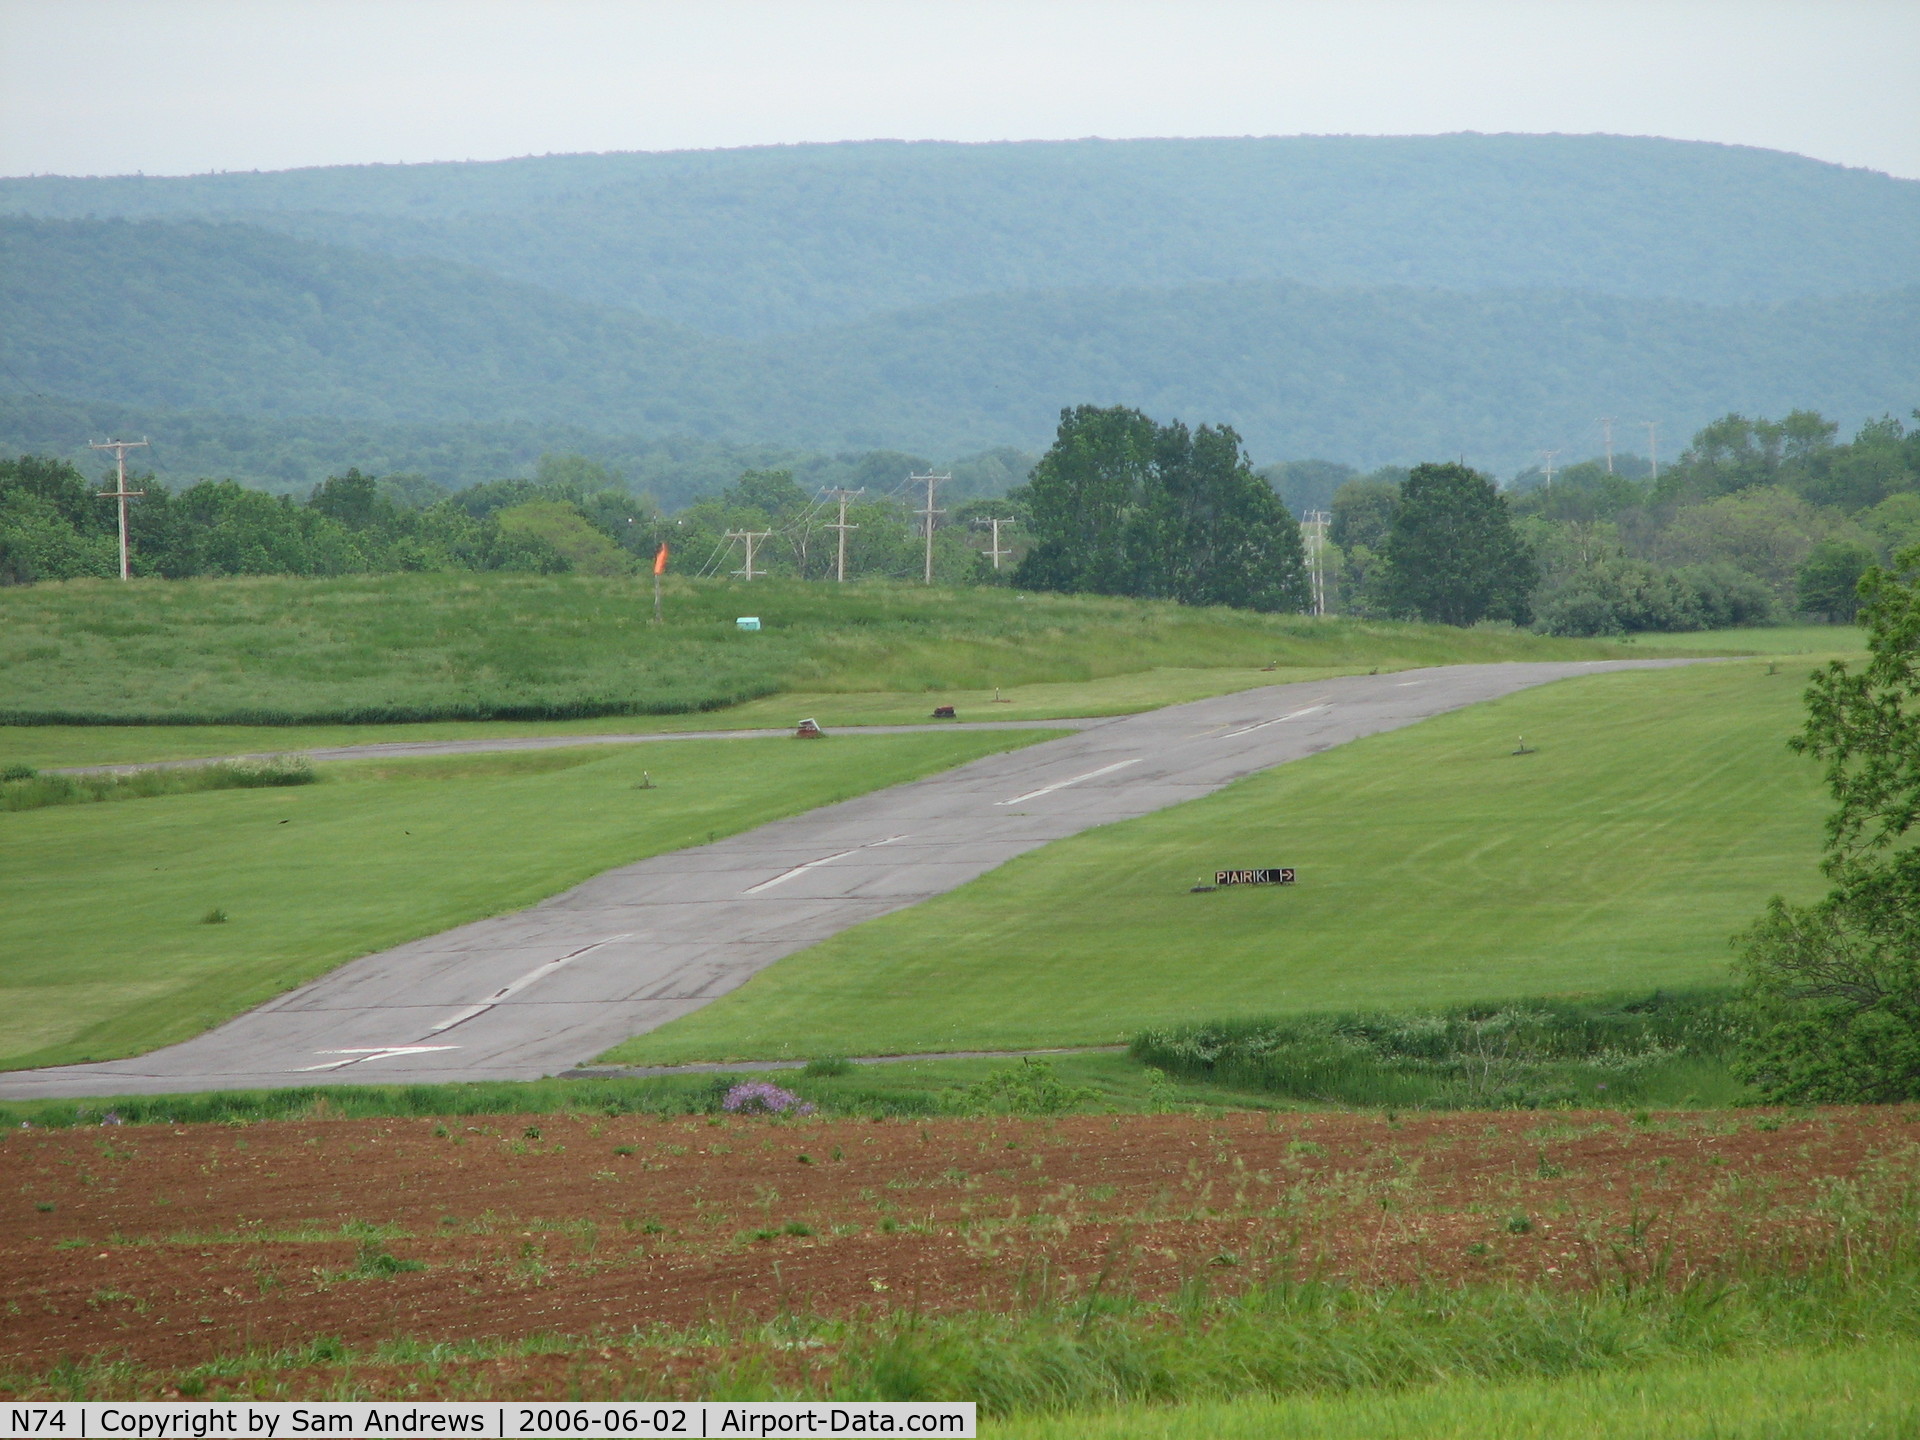 Penns Cave Airport (N74) - approach end to rwy7 from the next hill over